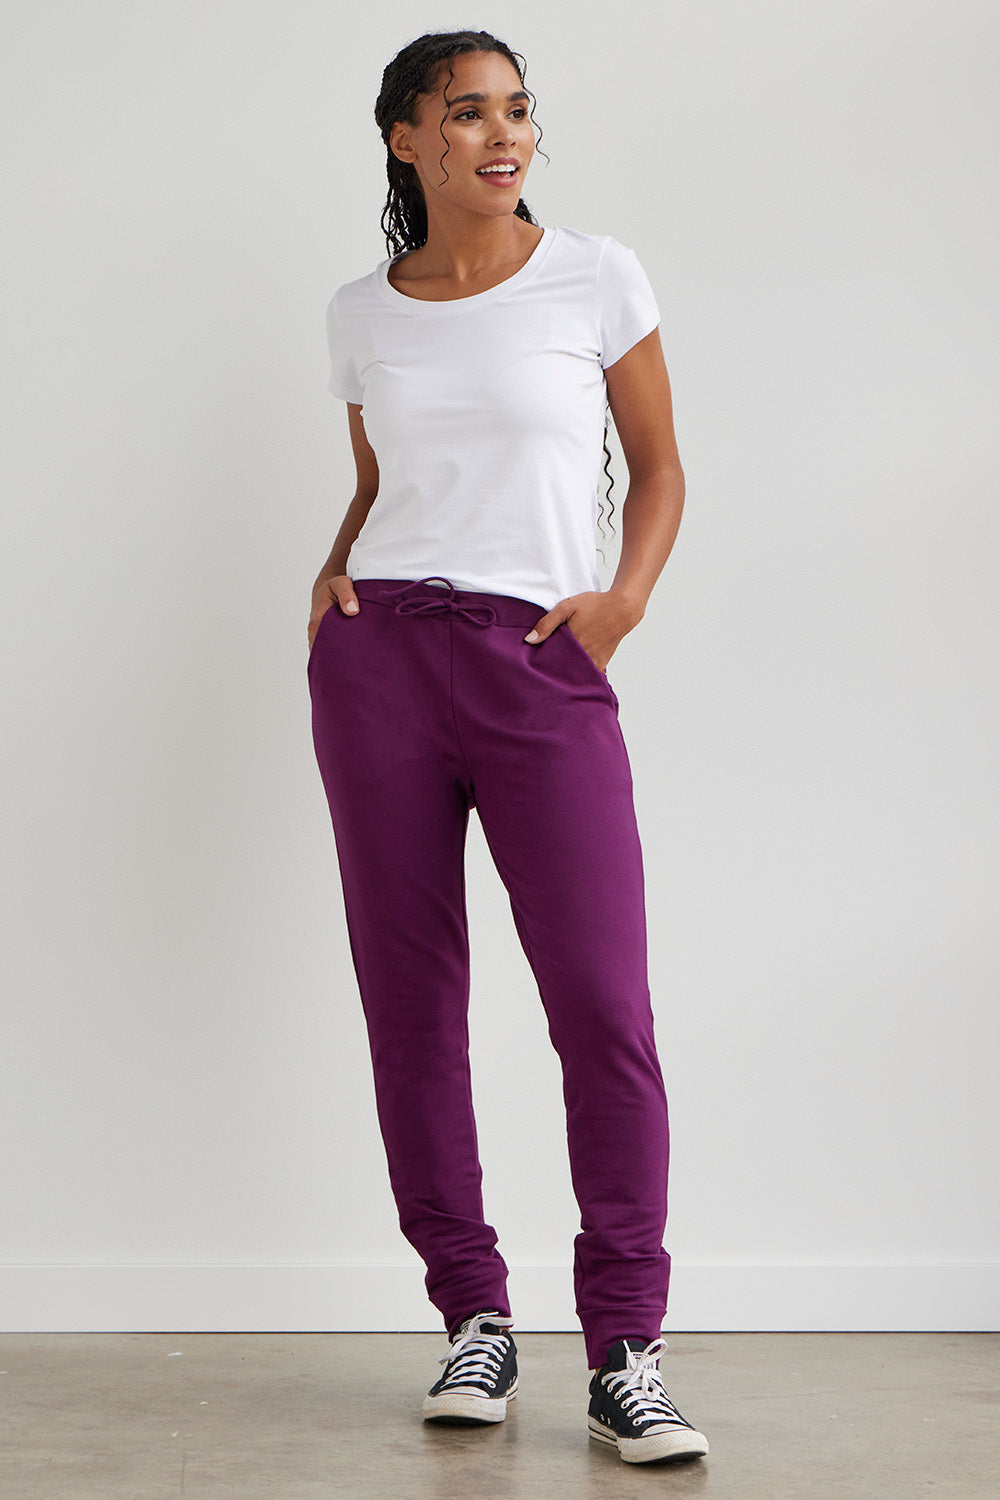 32 Degrees Rayon Athletic Sweat Pants for Women